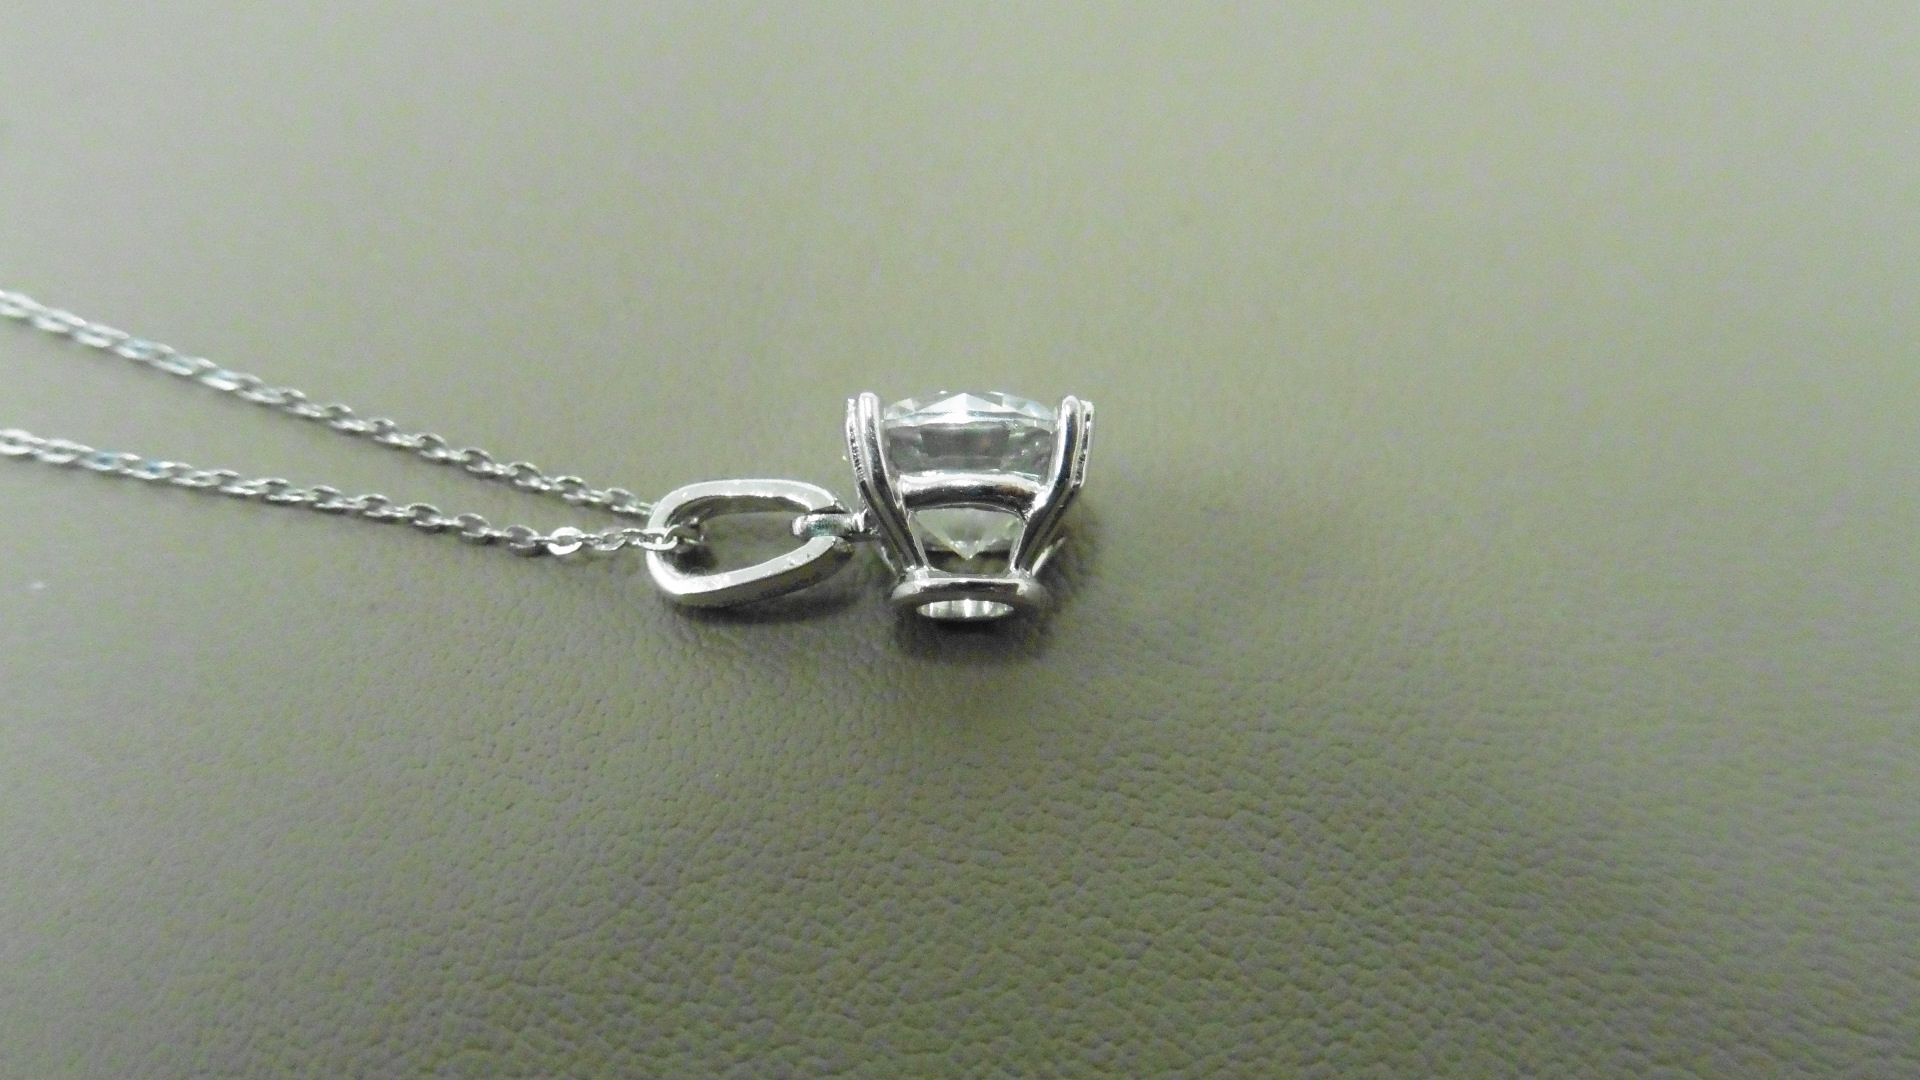 1.00ct diamond solitaire style pendant. Brilliant cut diamond, H colour and i1 clarity. Set in a - Image 2 of 2